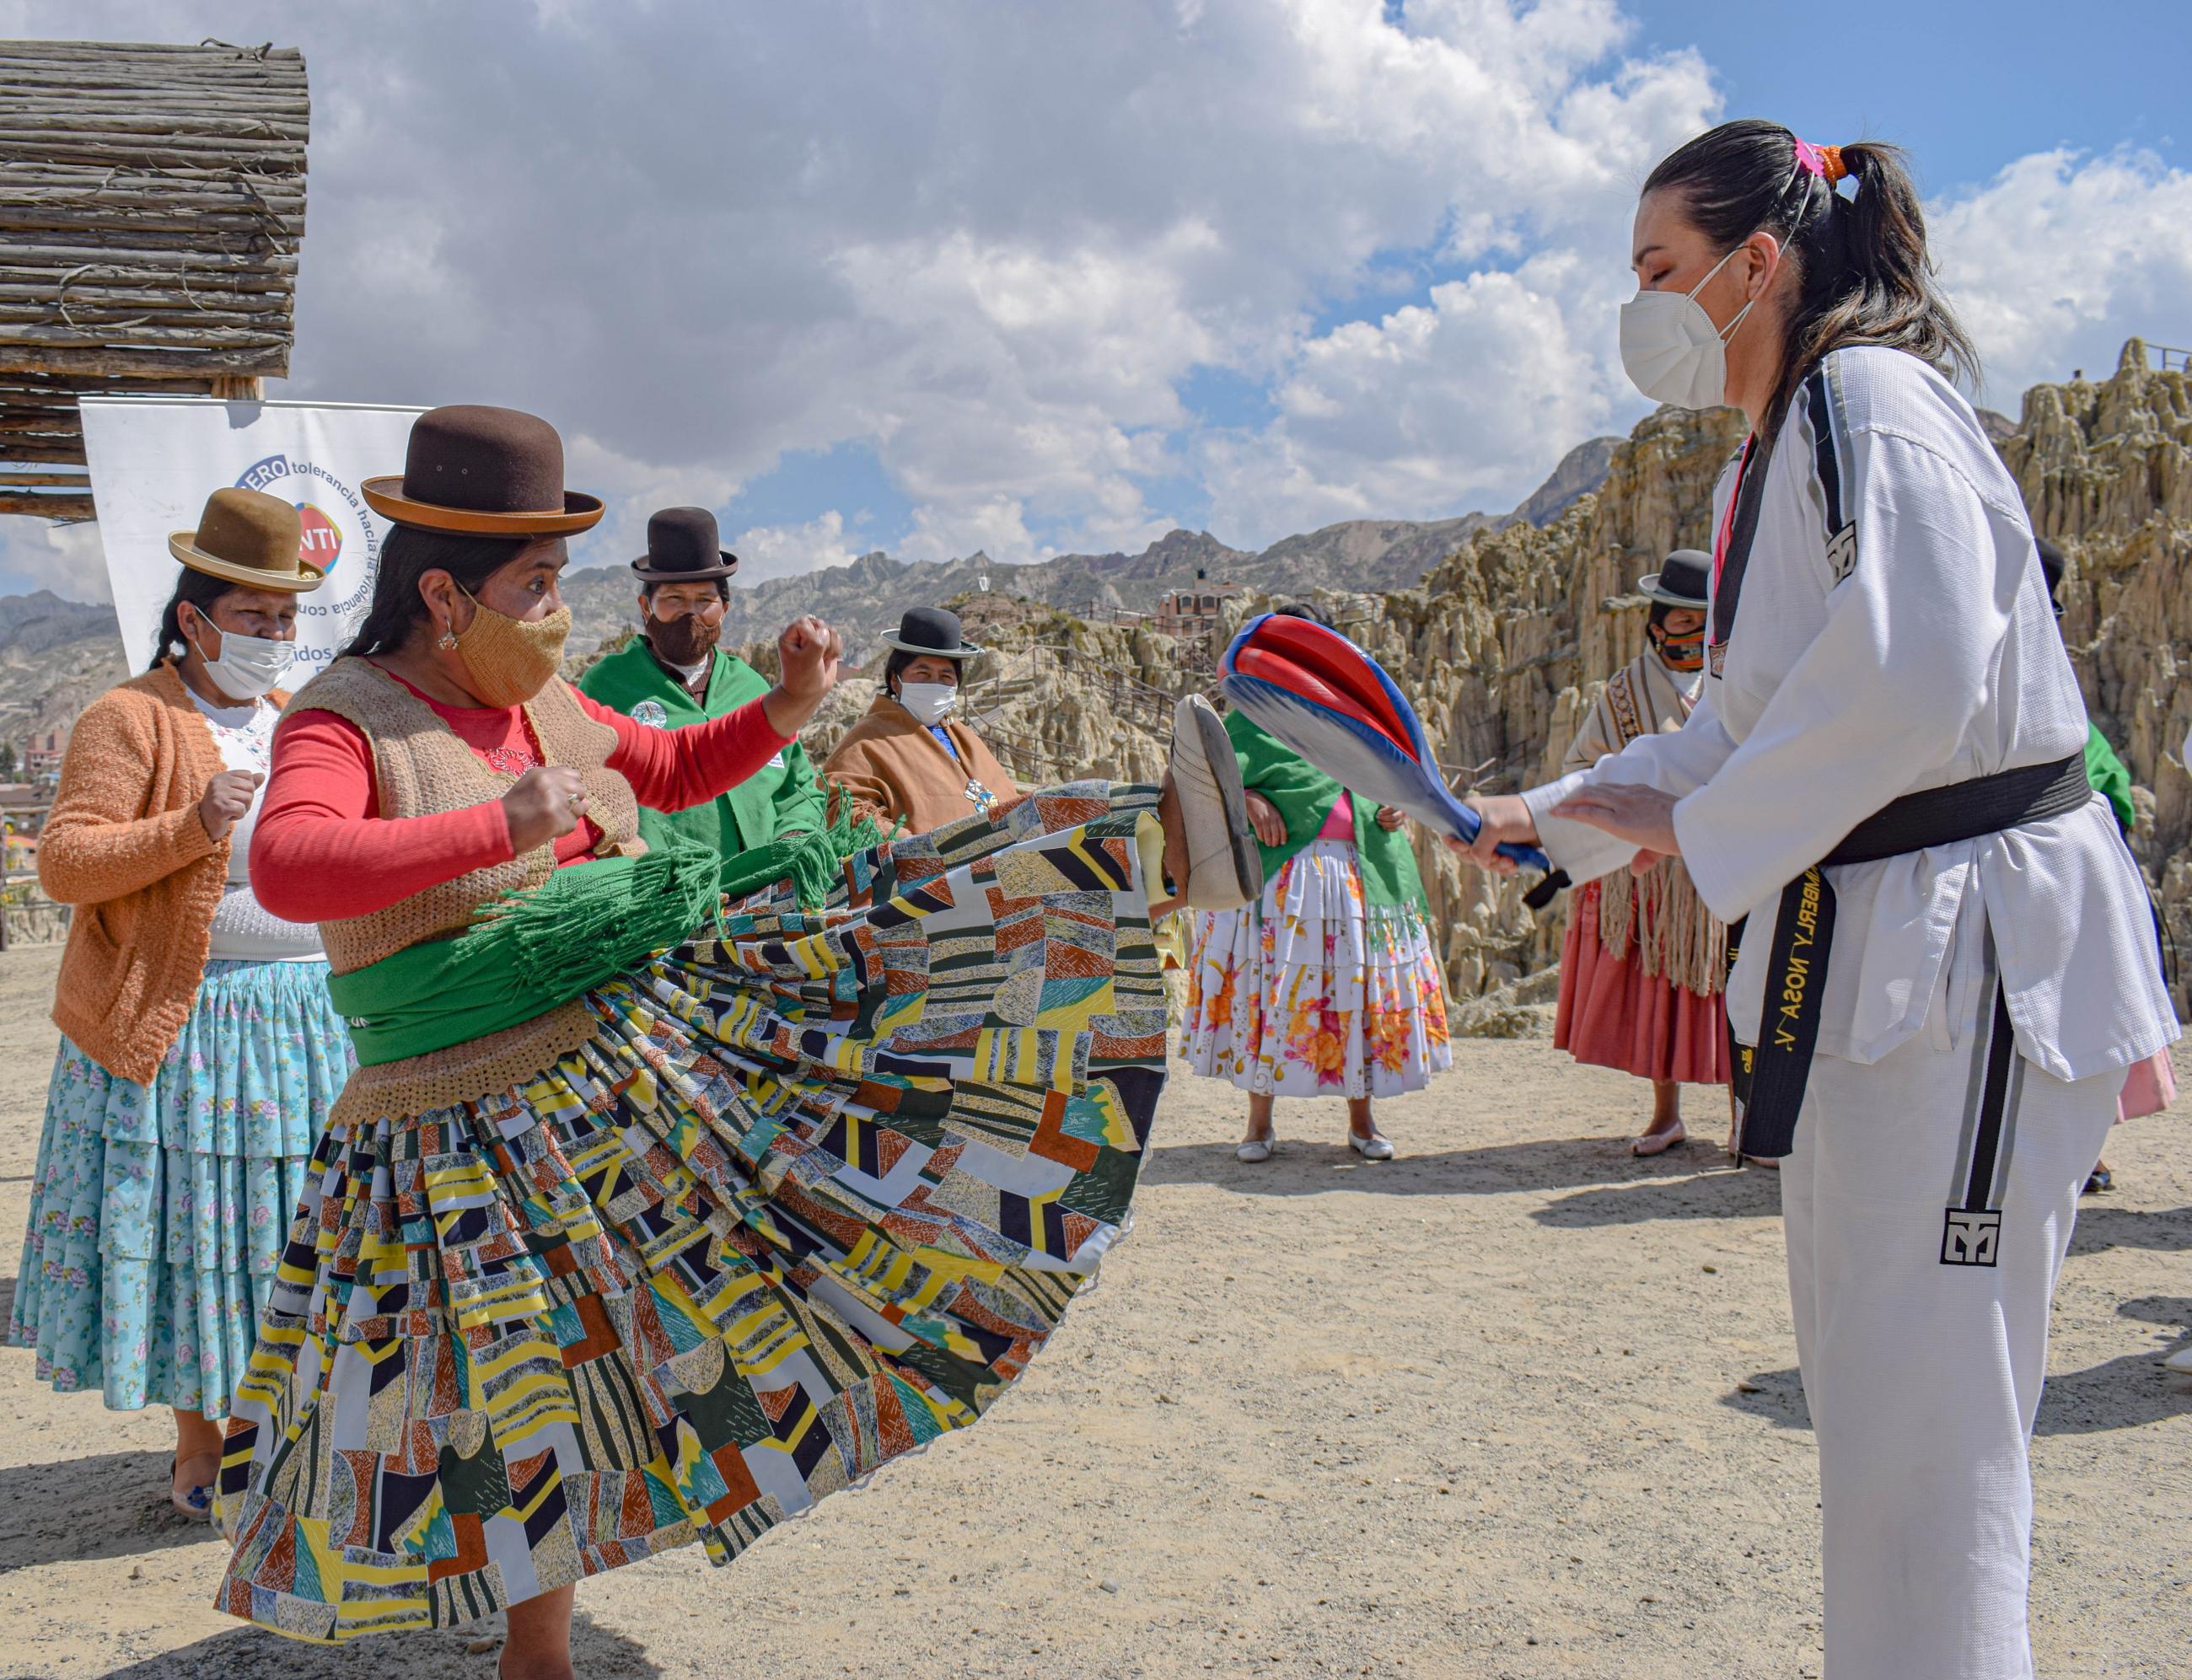 Bolivian Aymara women in colorful dresses learn self-defense on the outskirts of La Paz, Bolivia